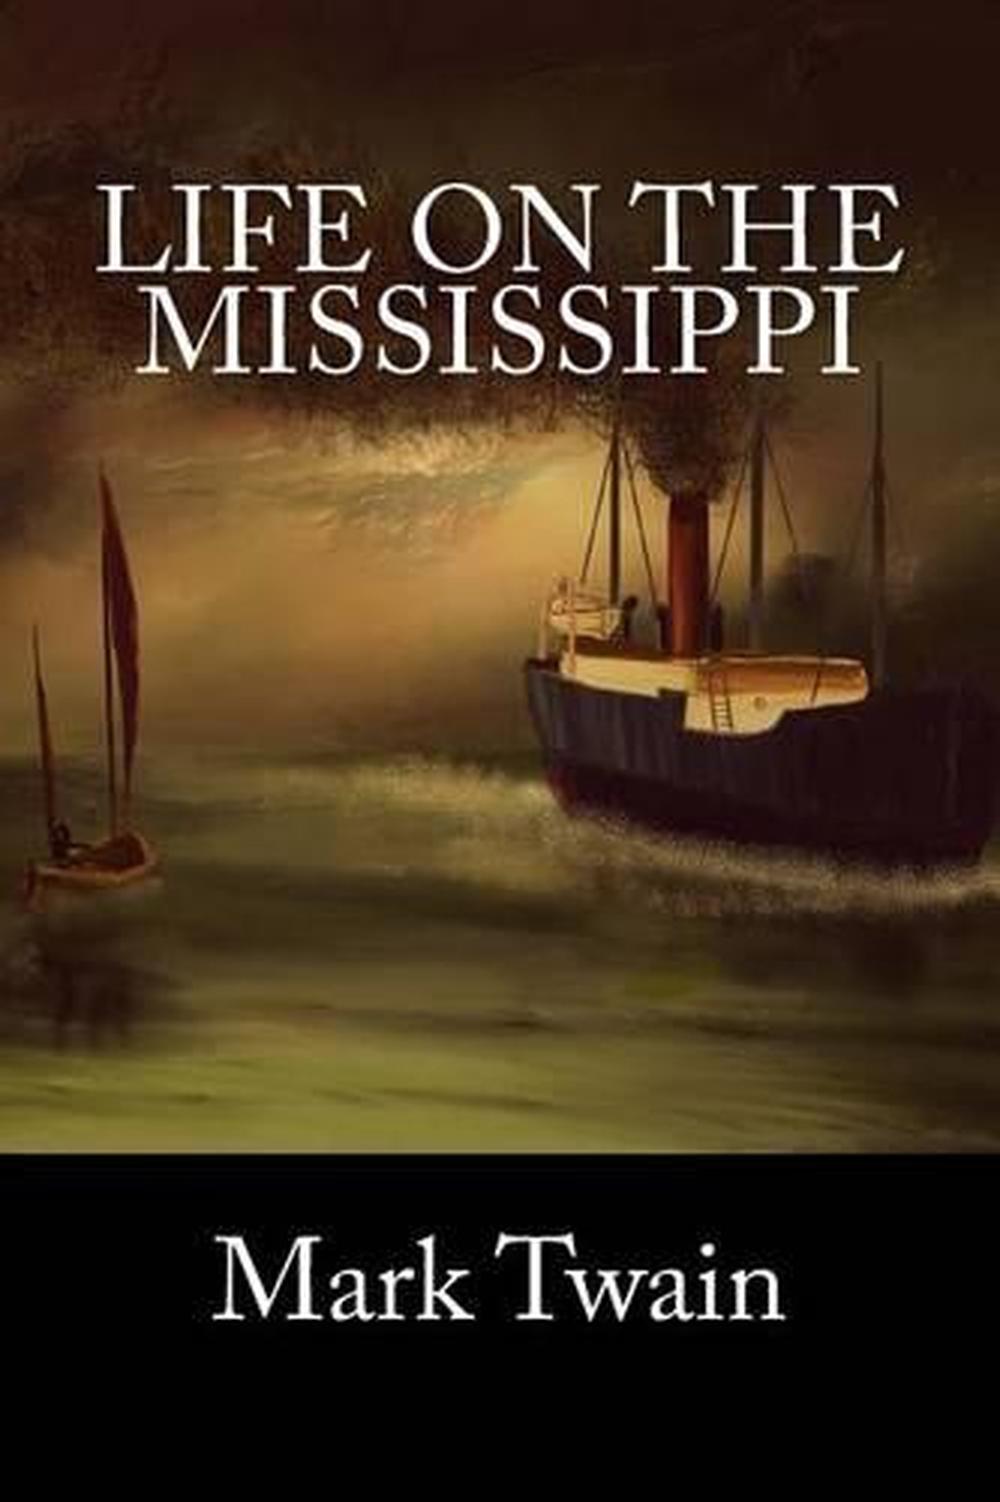 book life on the mississippi